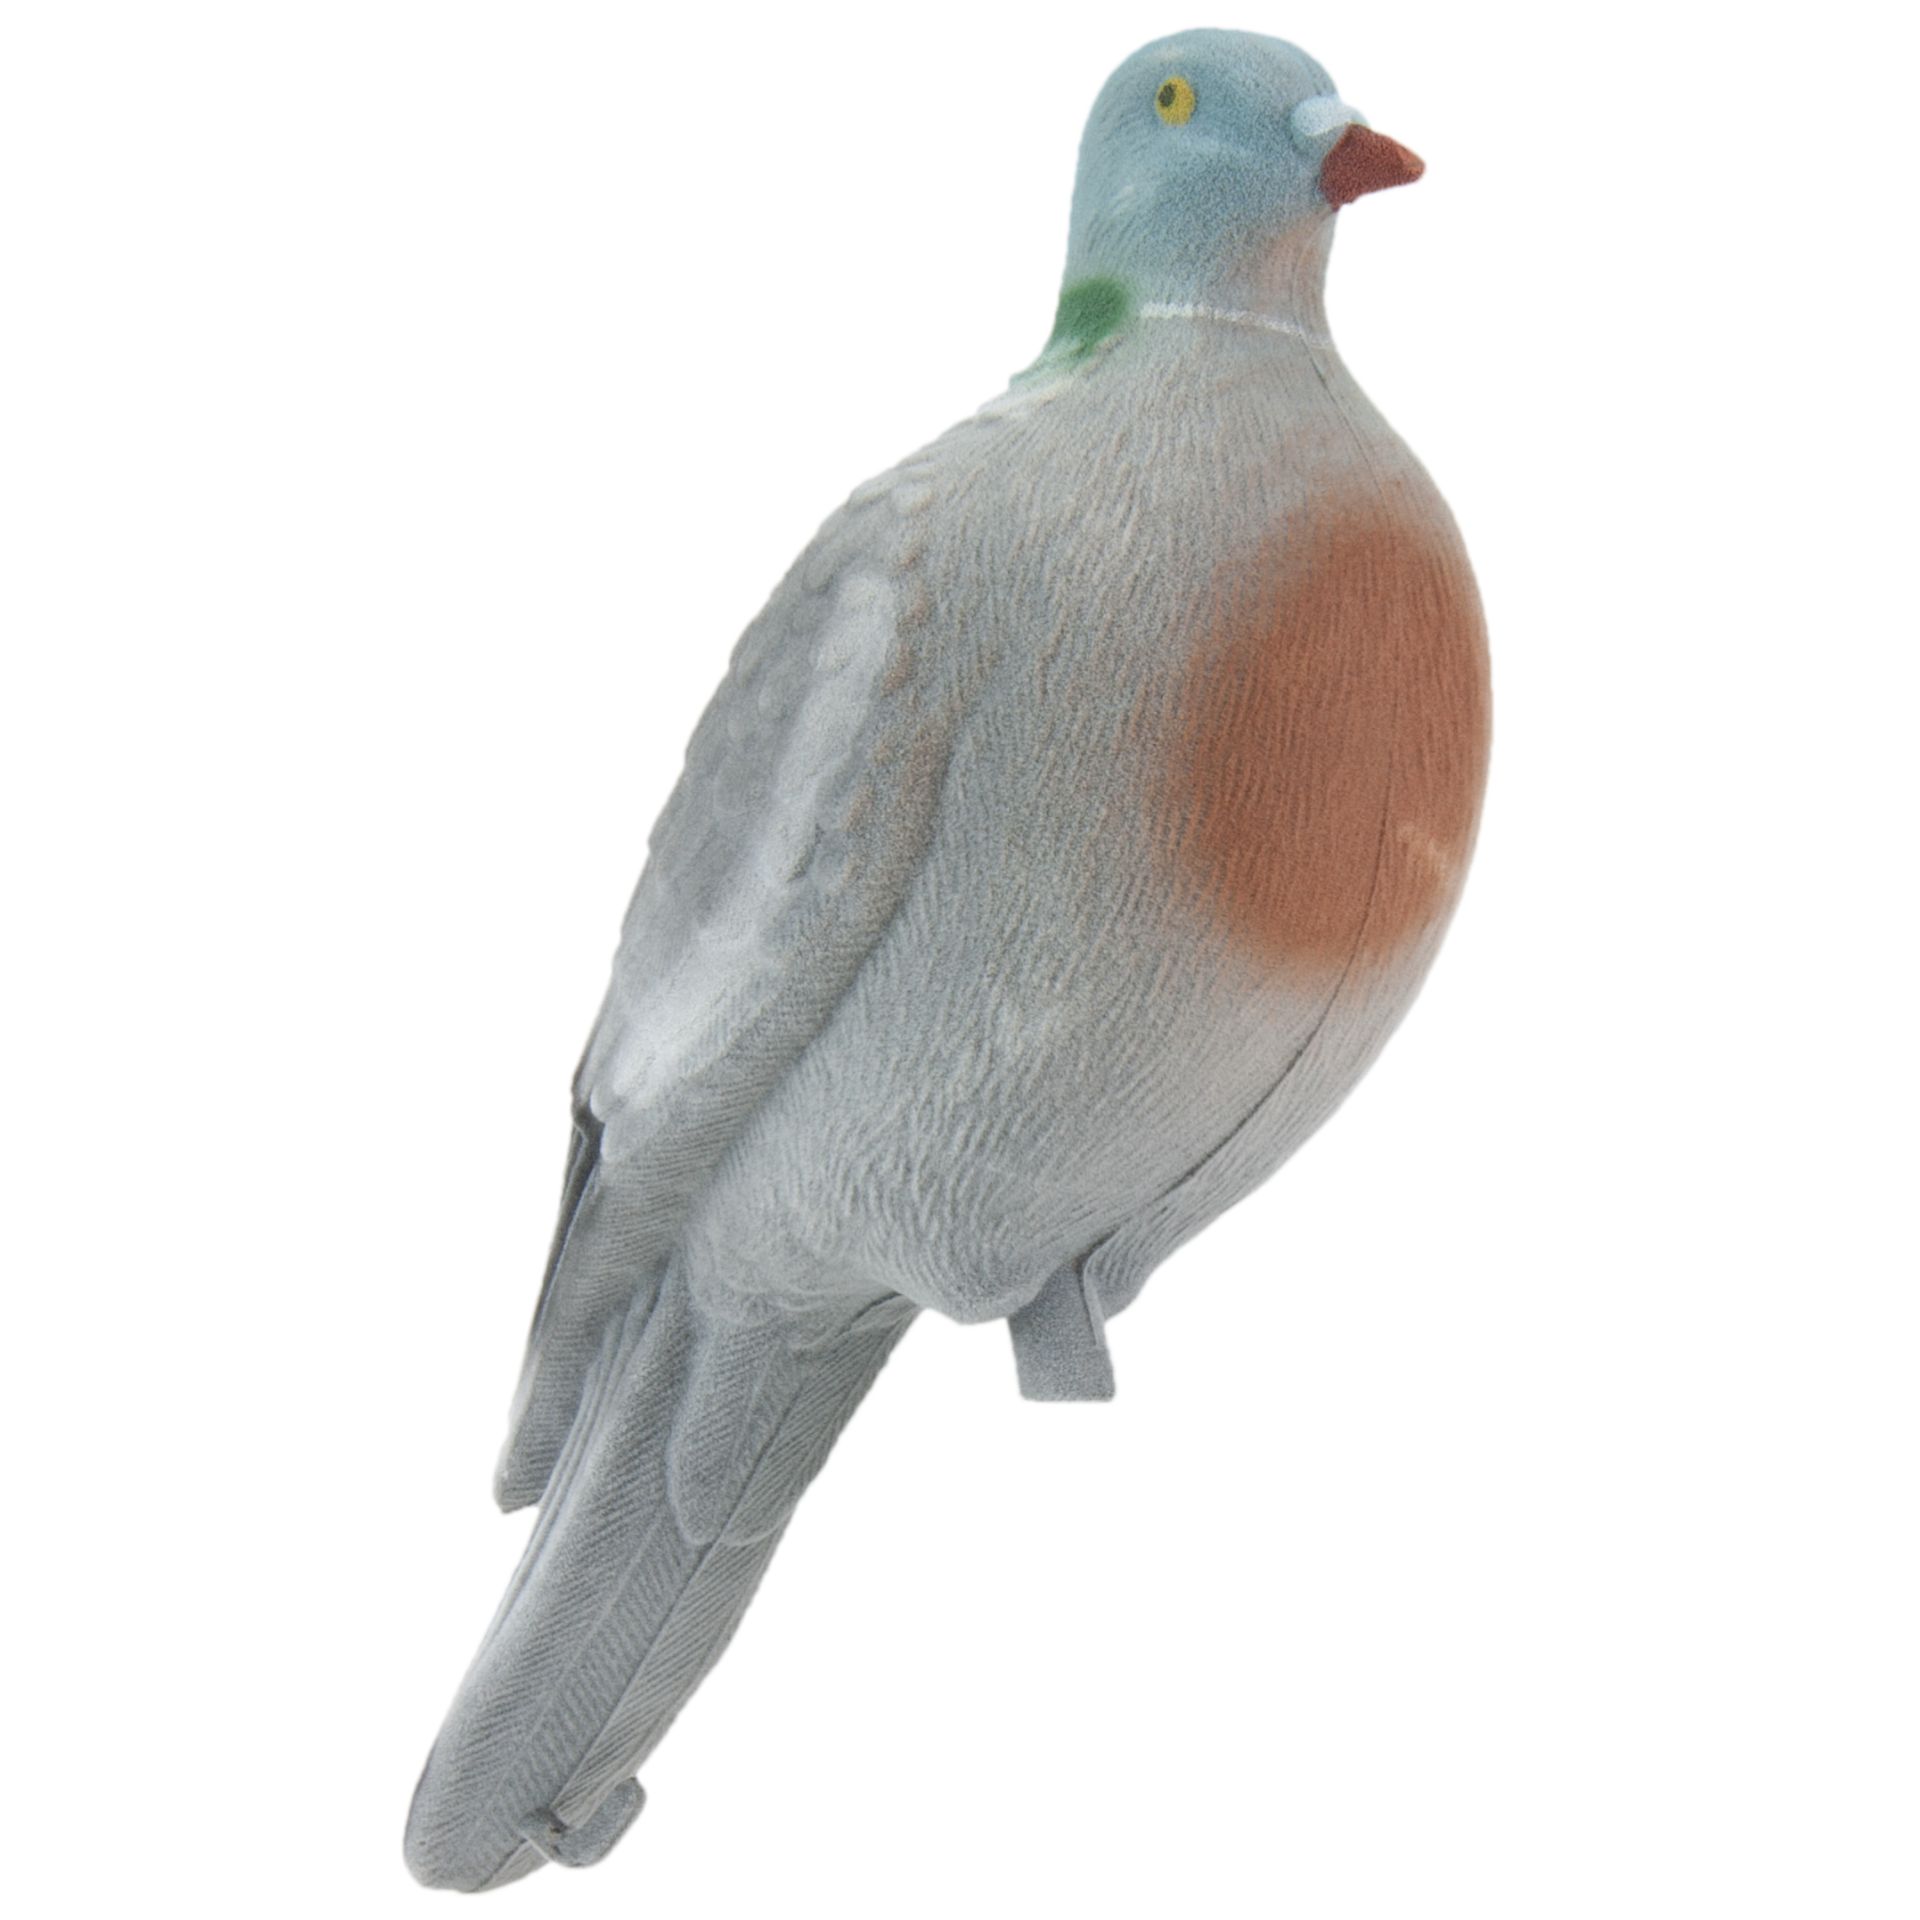 Full -Shell Curling Pigeon